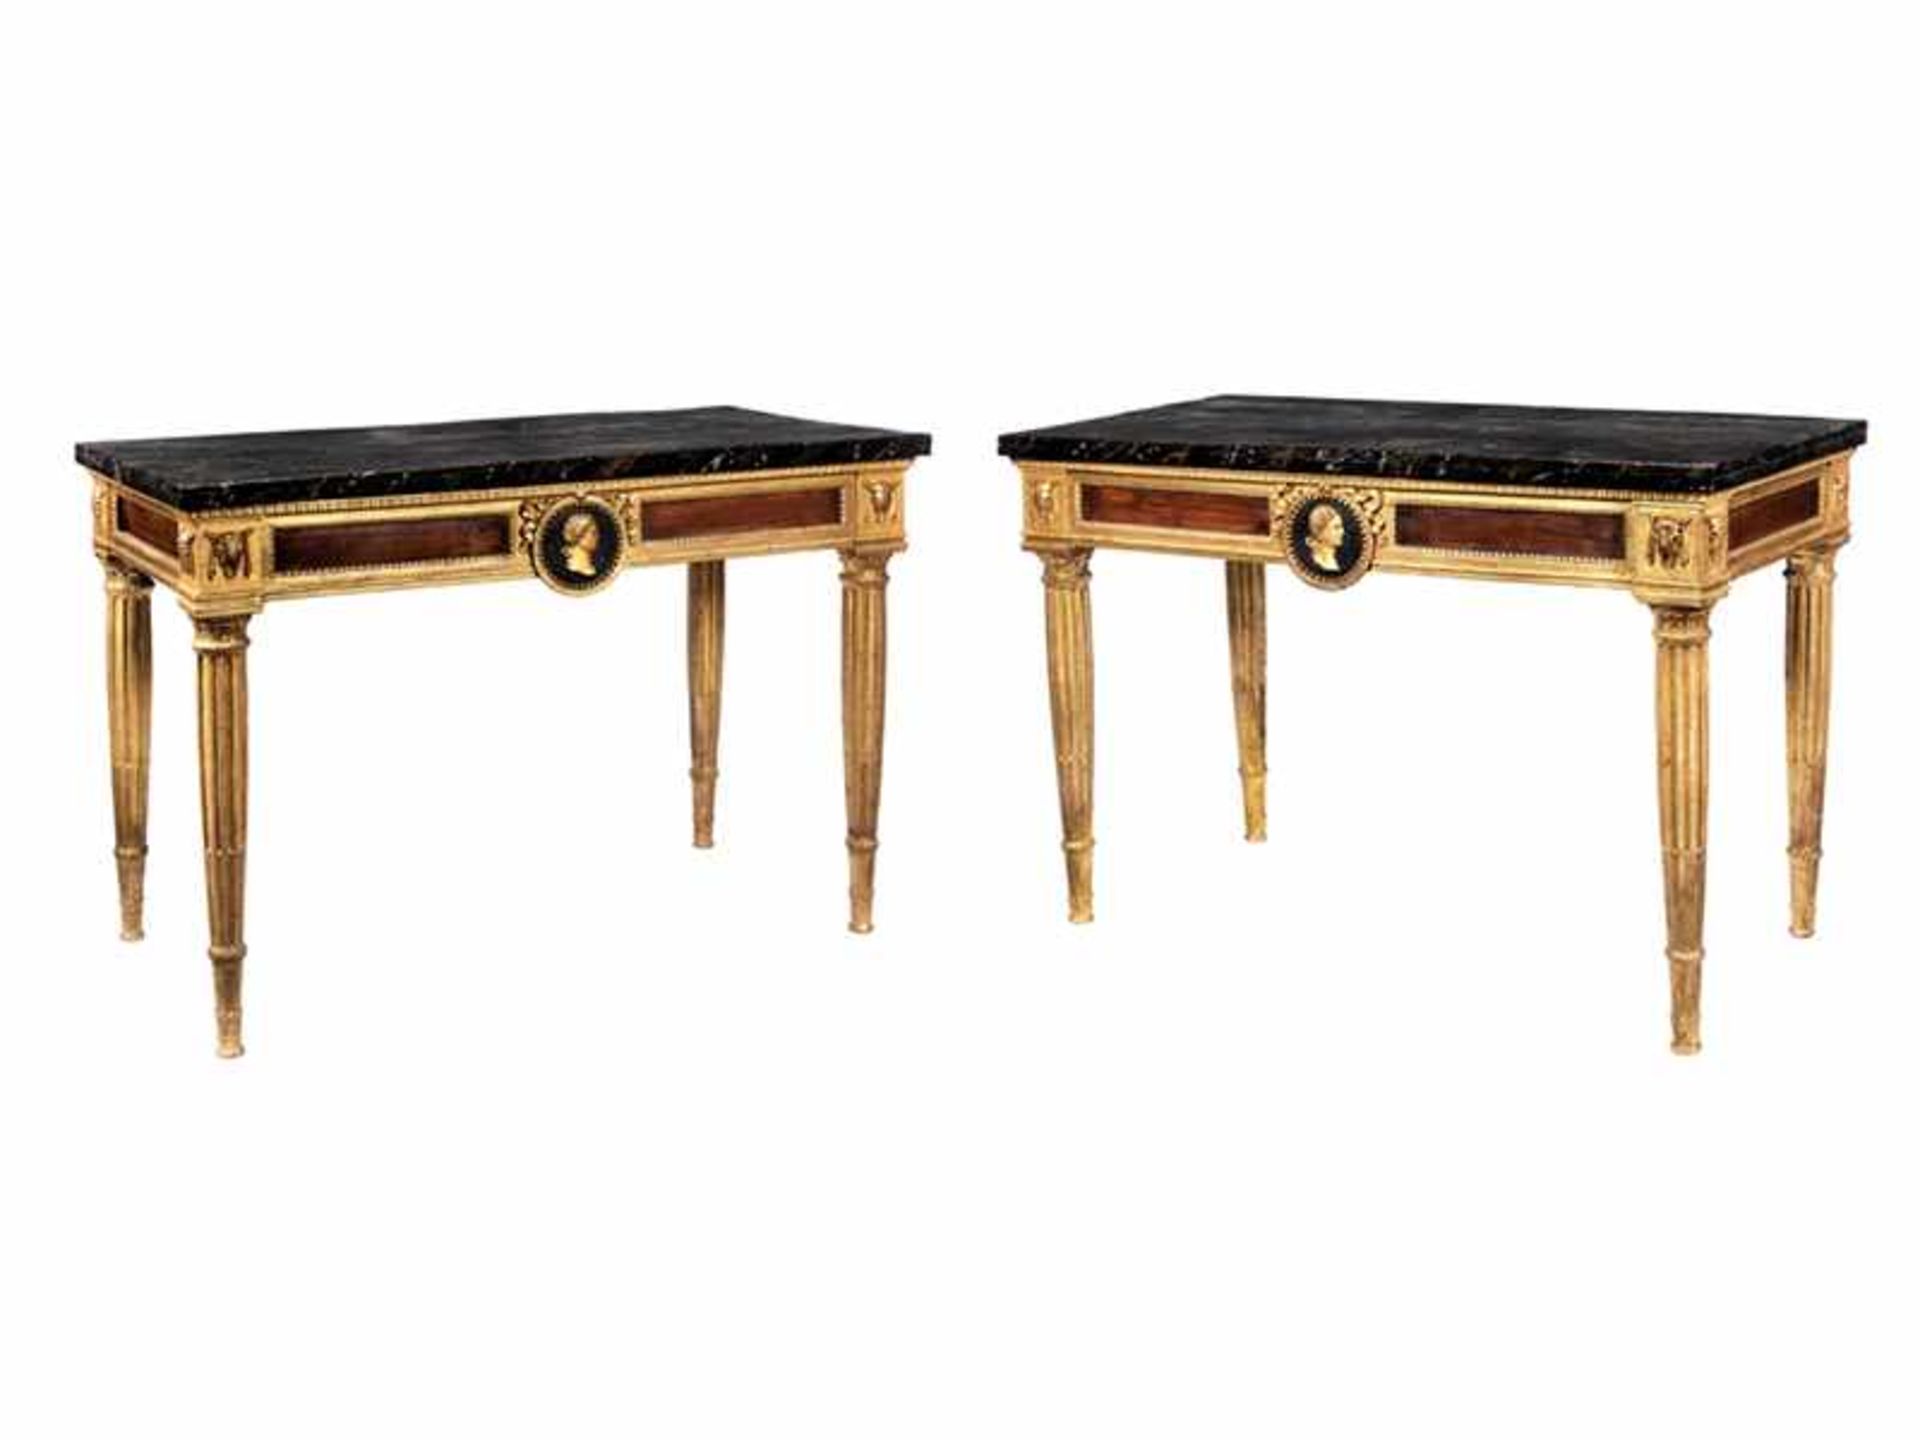 A pair of classical console tables